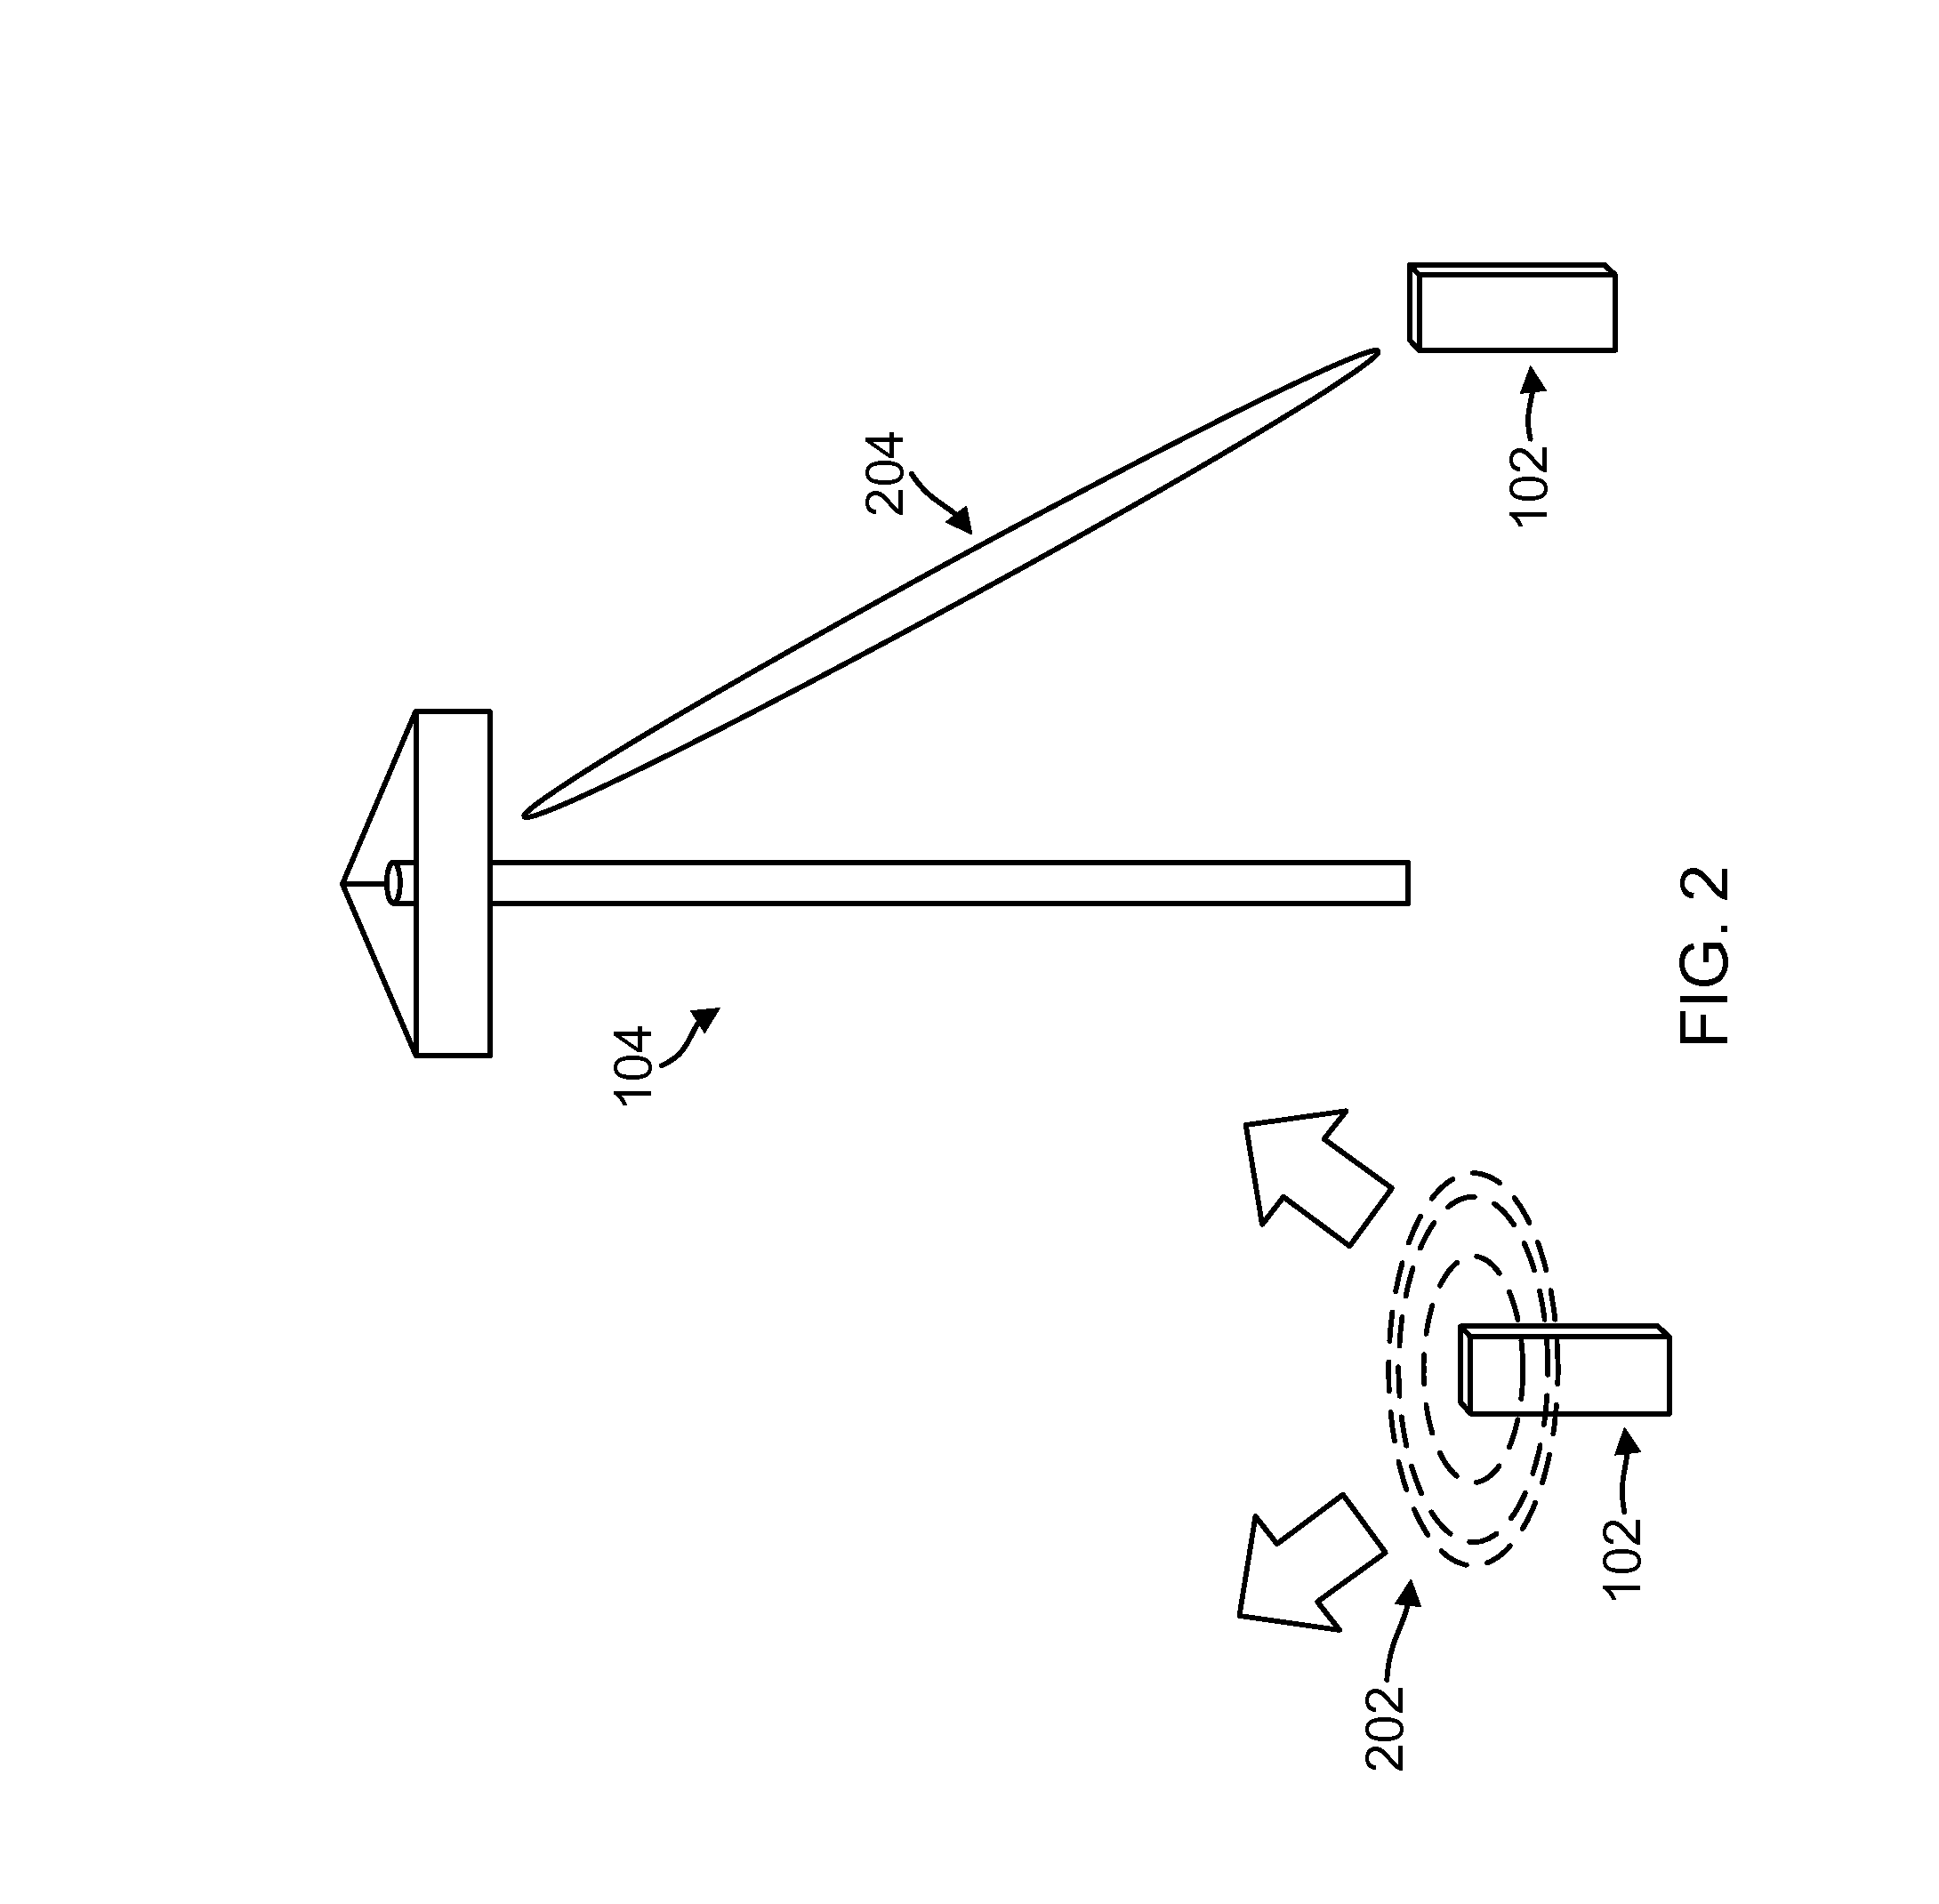 Reciprocal channel sounding reference signal multiplexing